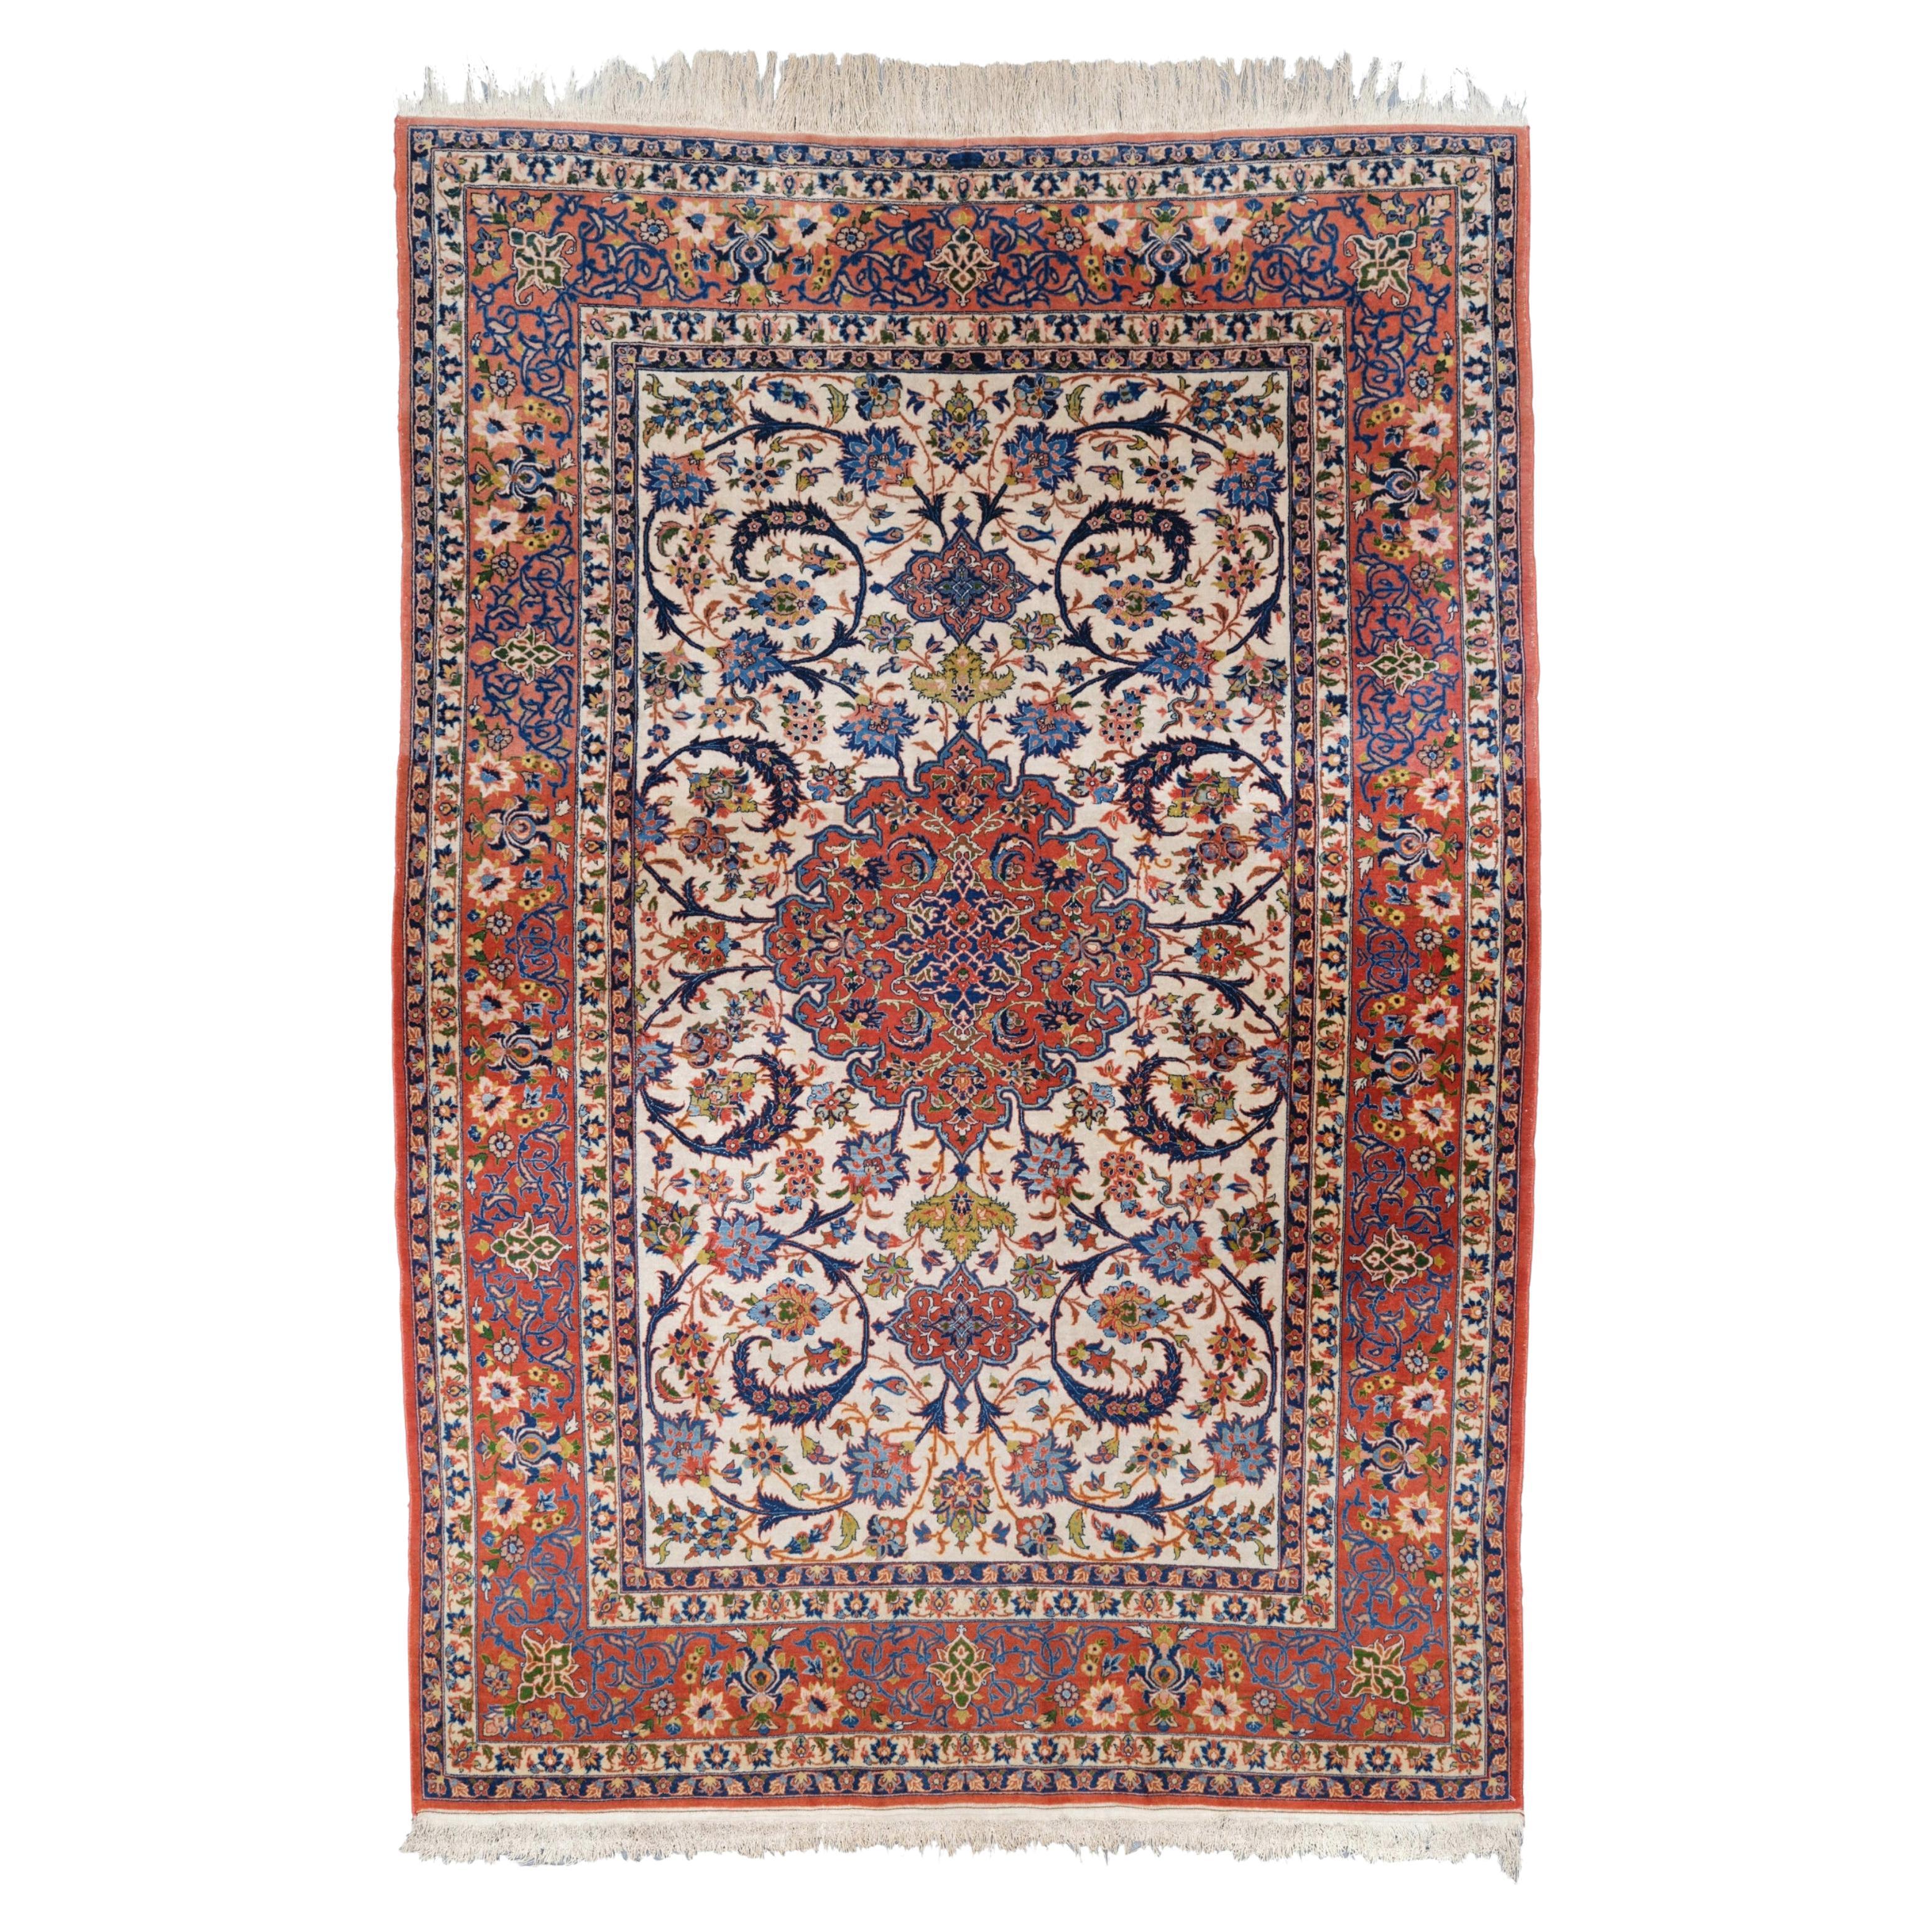 Antique Isfahan Rug - Late of 19th Centıry Isfahan Rug For Sale